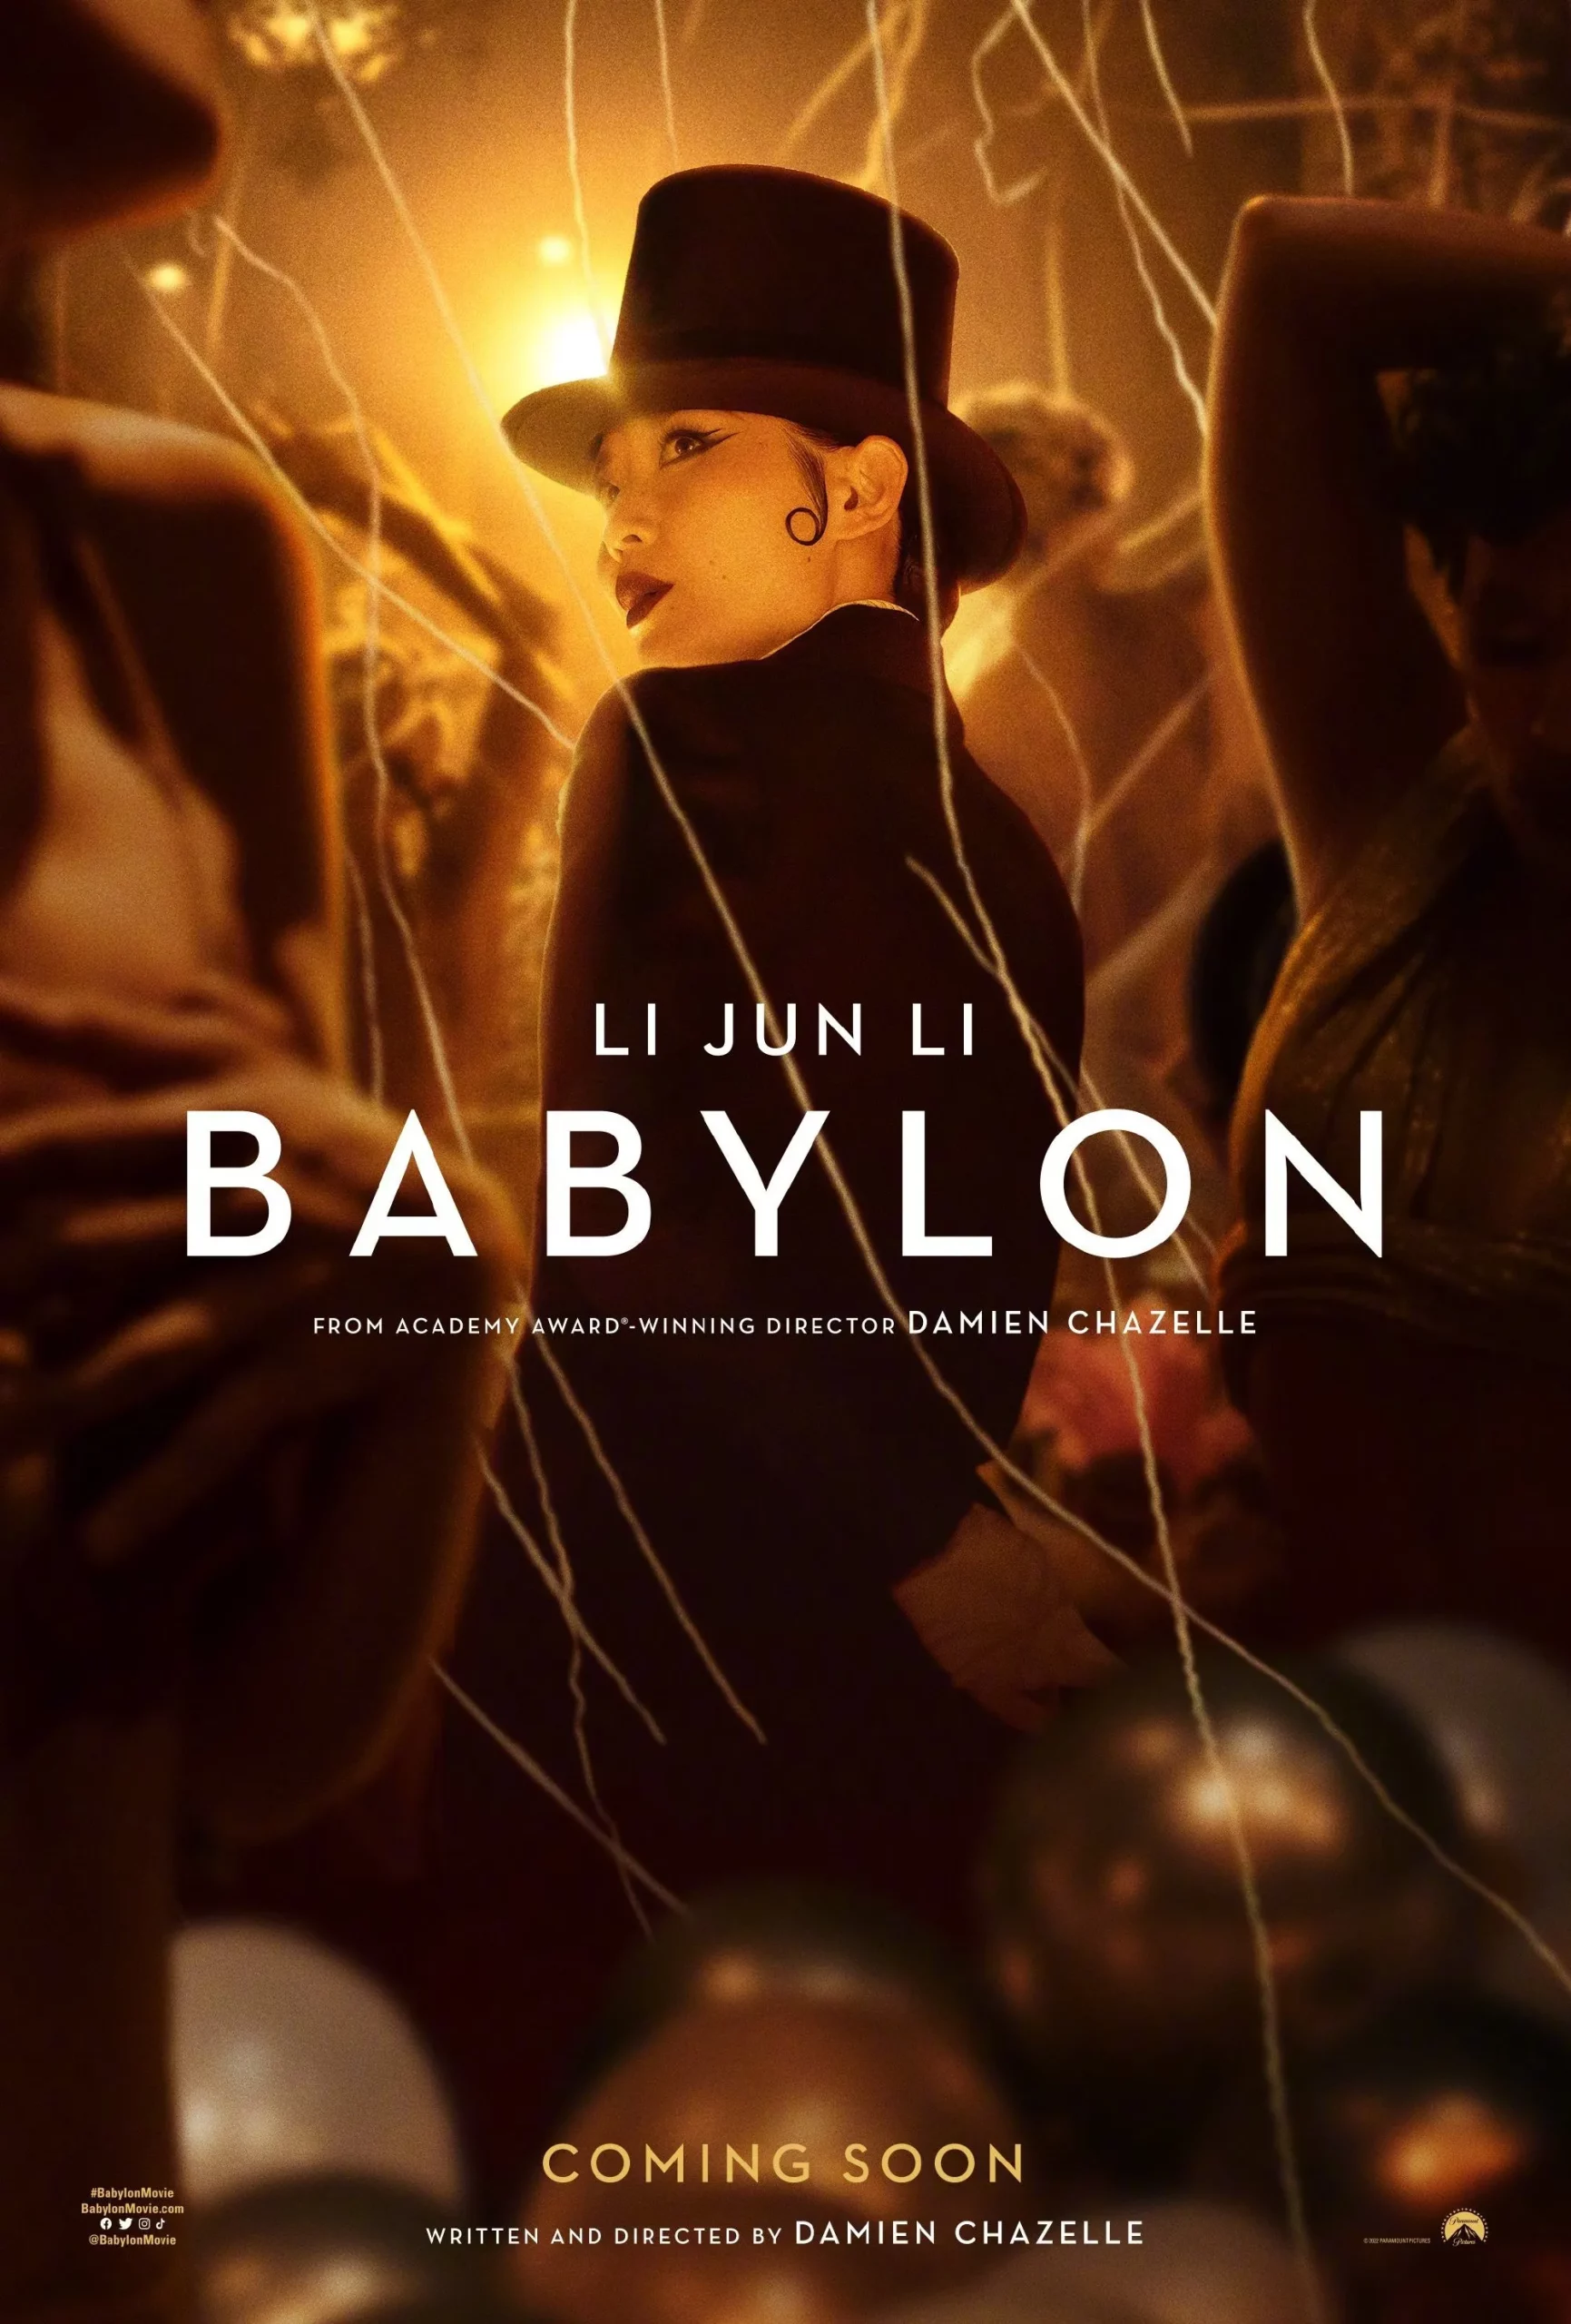 damien-chazelles-new-film-babylon-releases-character-posters-6